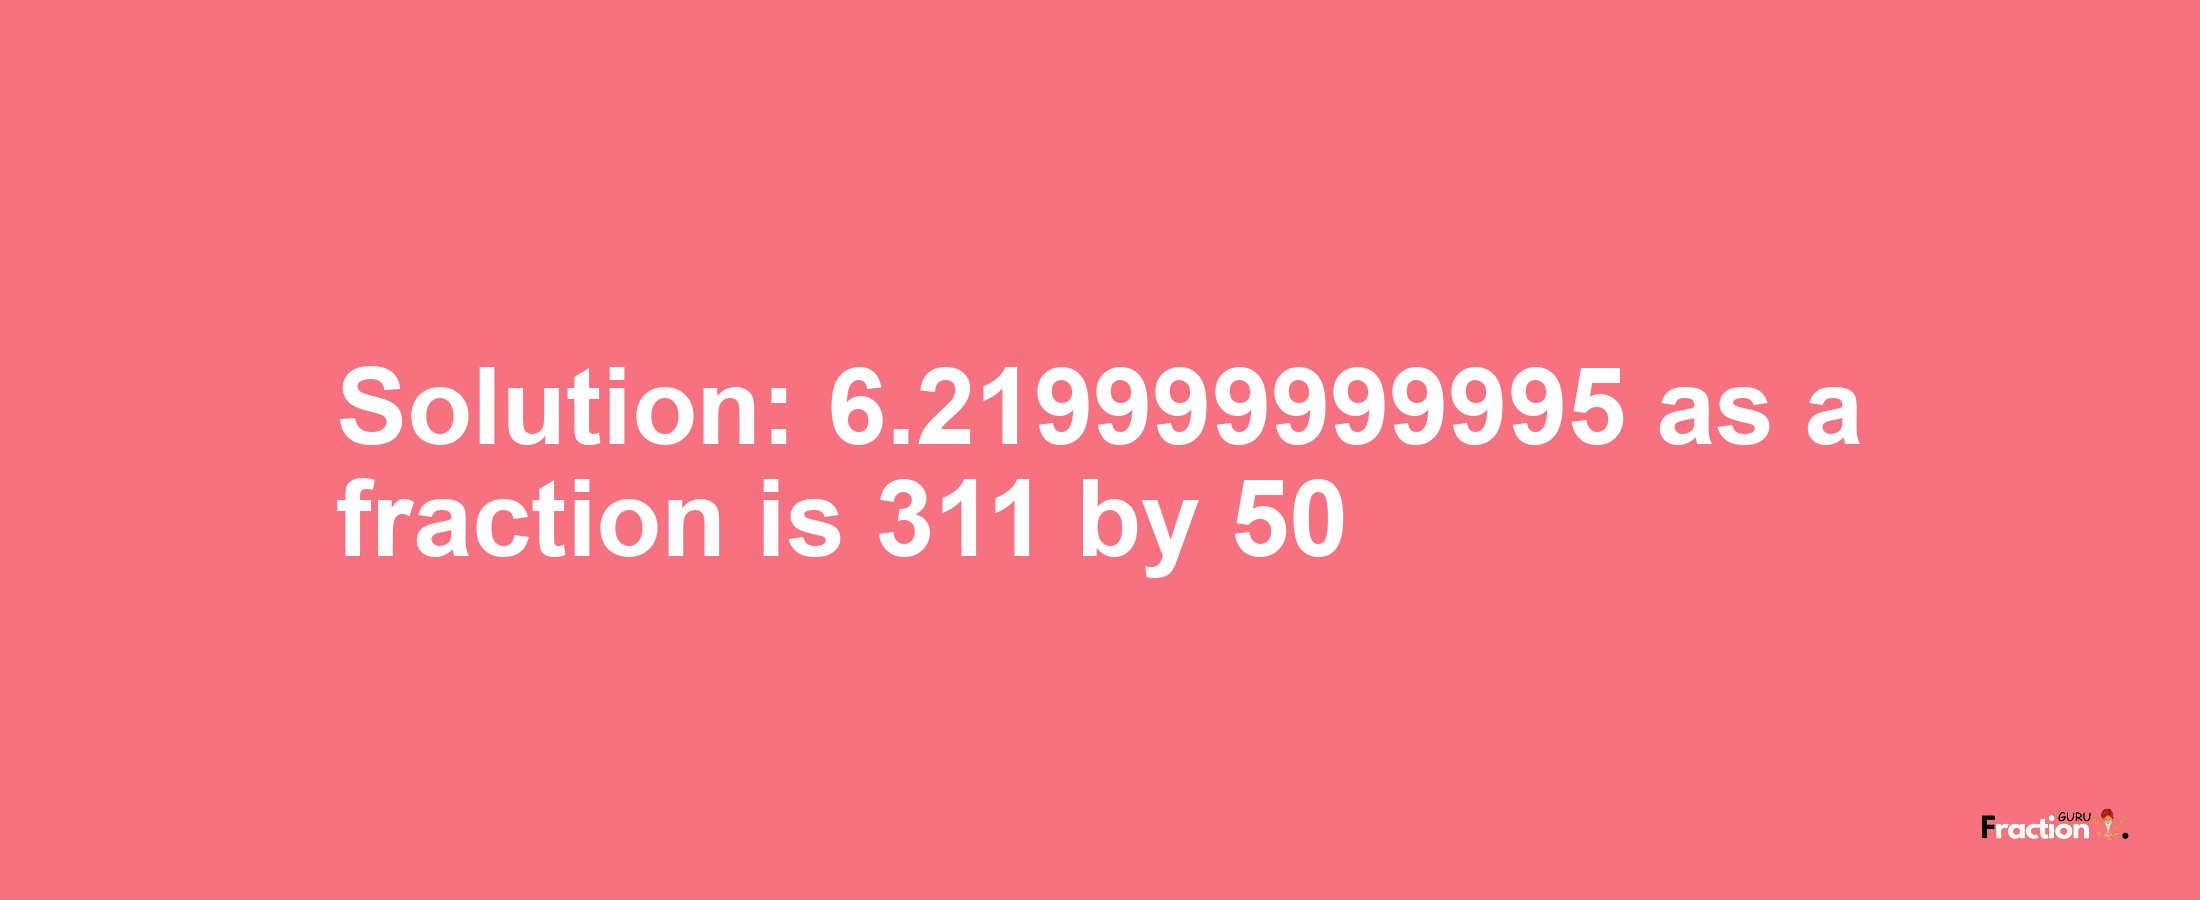 Solution:6.219999999995 as a fraction is 311/50